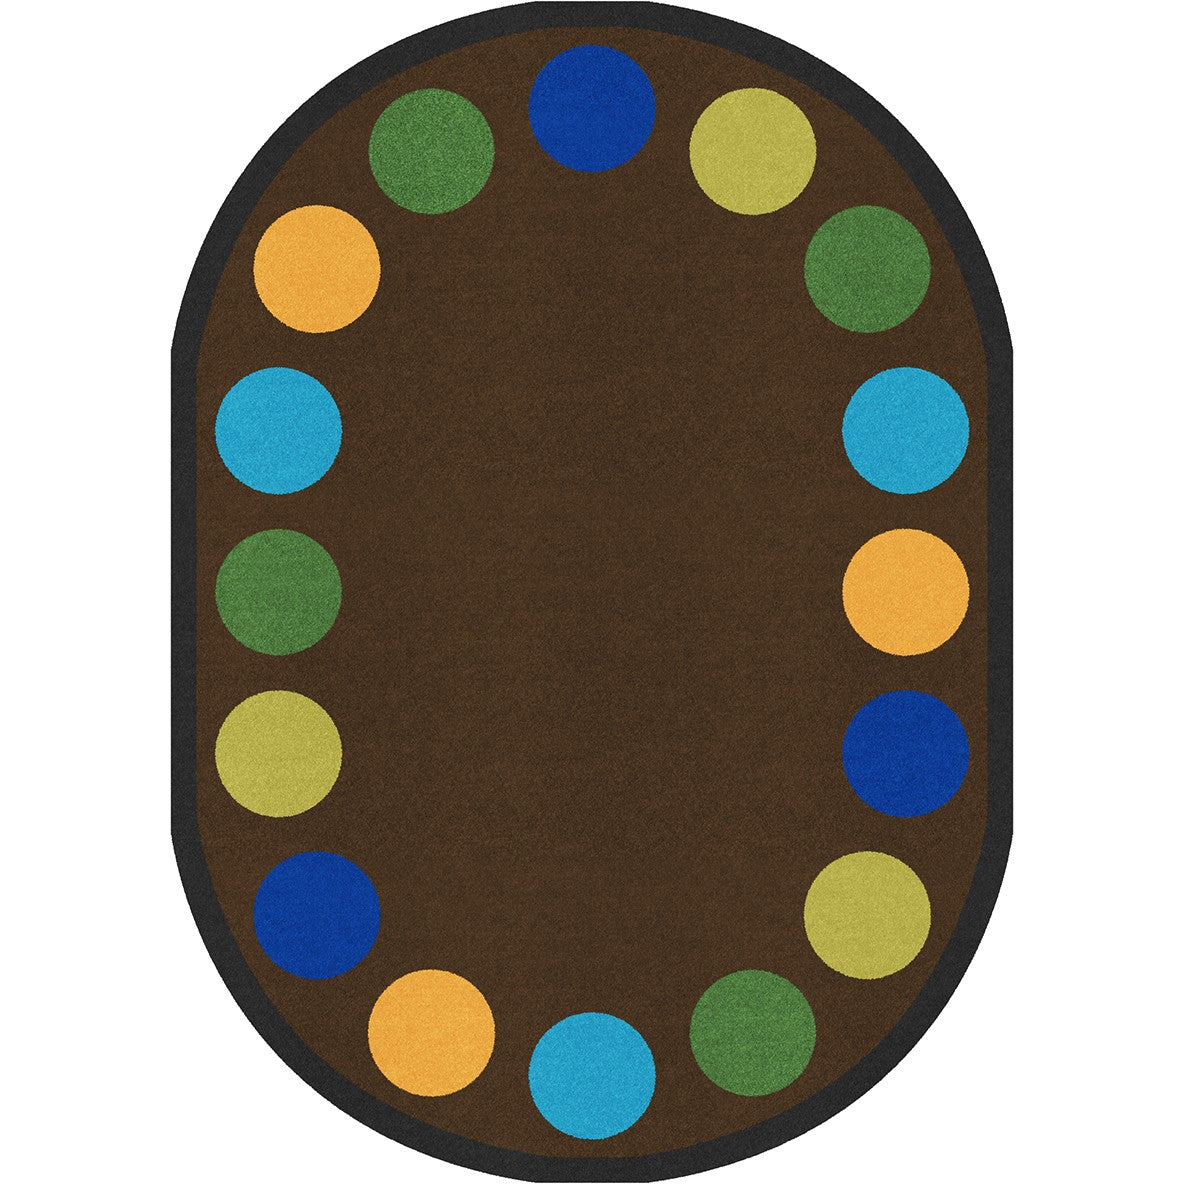 Lots of Dots™ Rug, 10'9" x 13'2" Oval (20 dots)